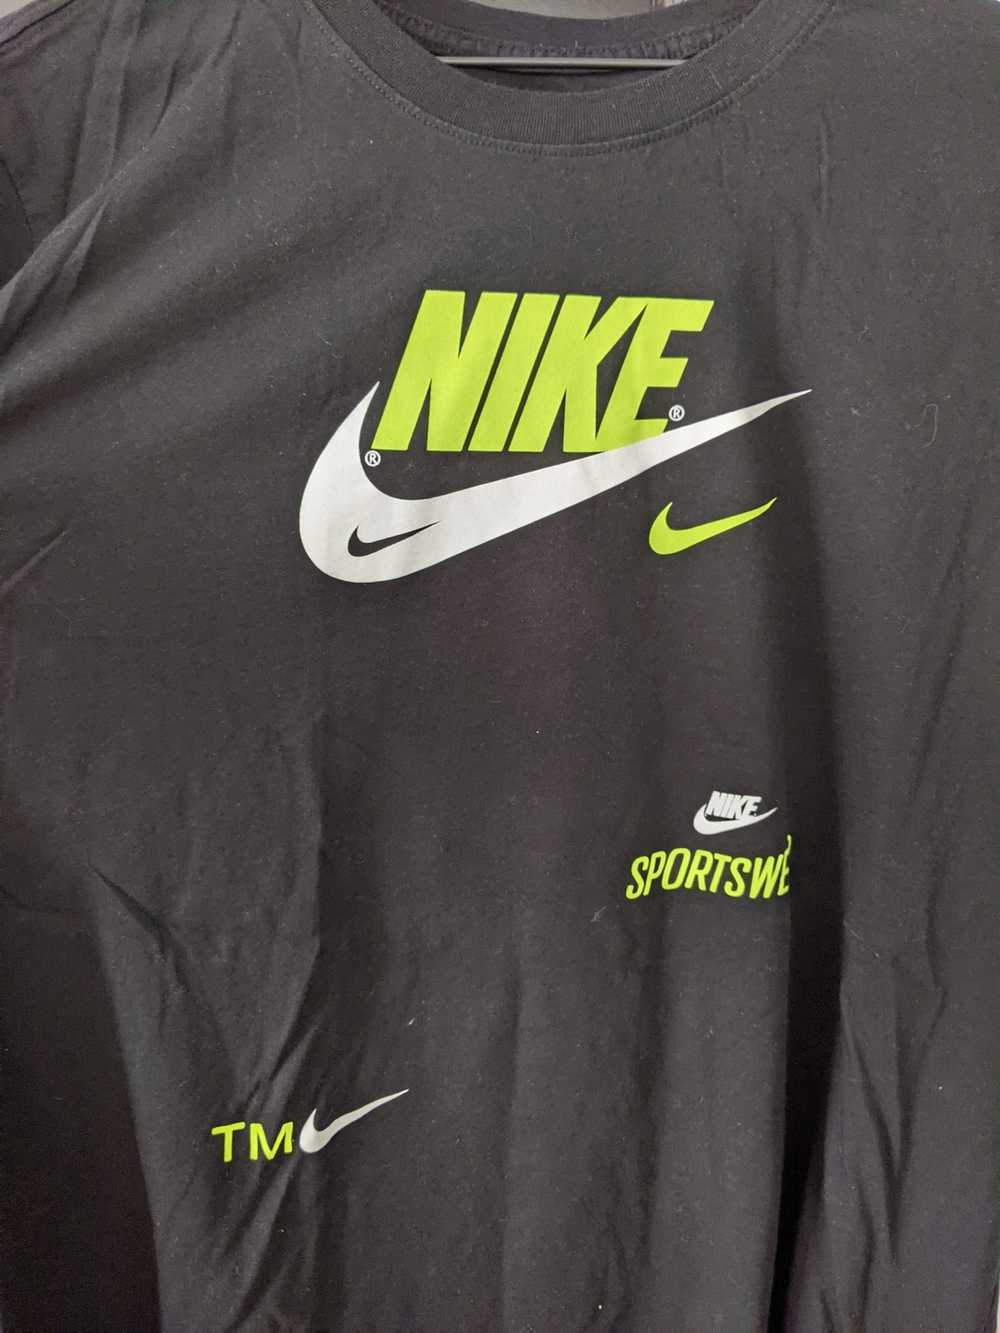 Nike 2-Pack "Over Branding" Nike Cotton T-Shirts - image 4